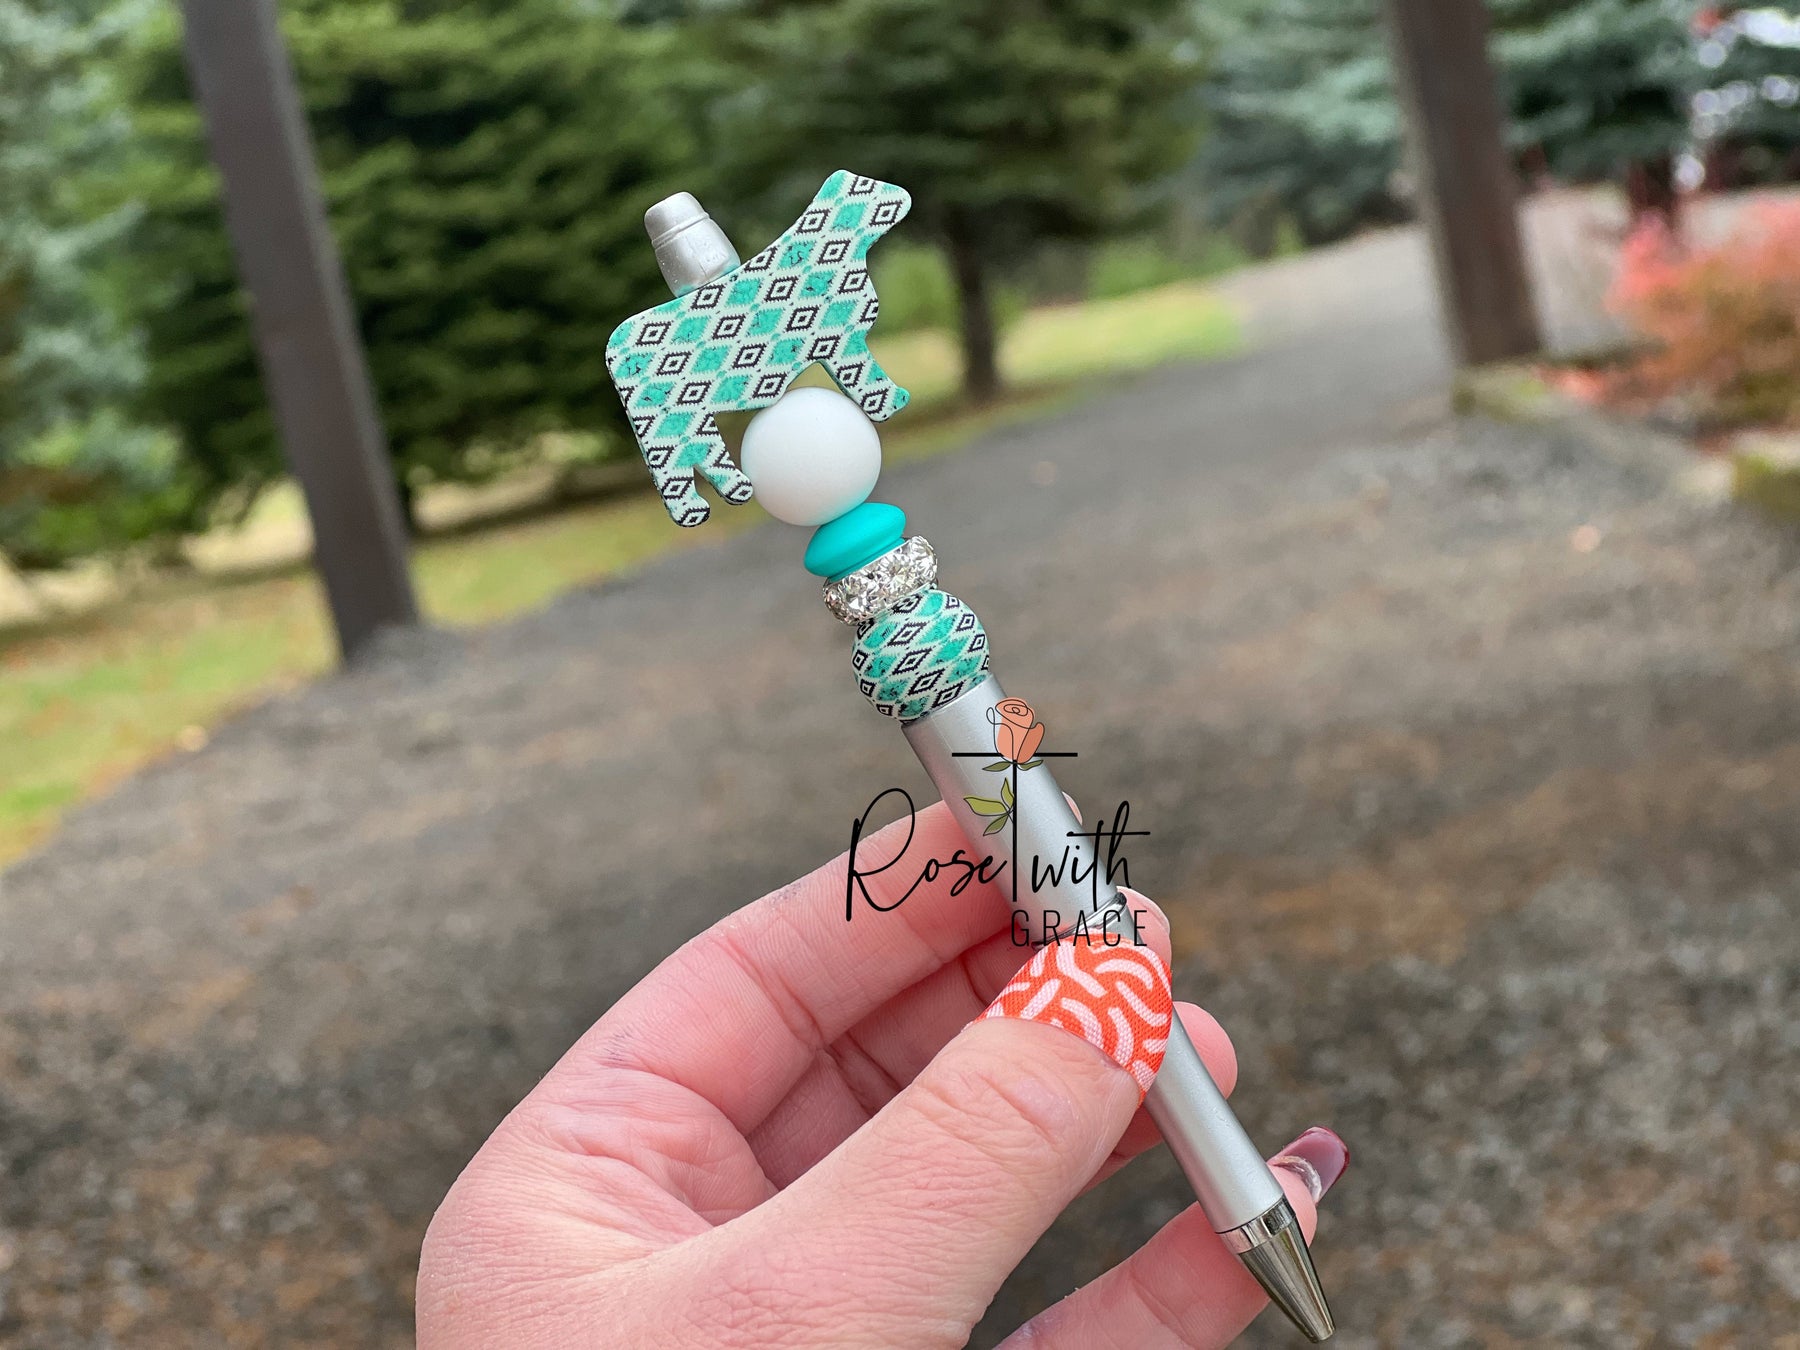 GIVE ME COWS & TURQUOISE PEN Rose with Grace LLC